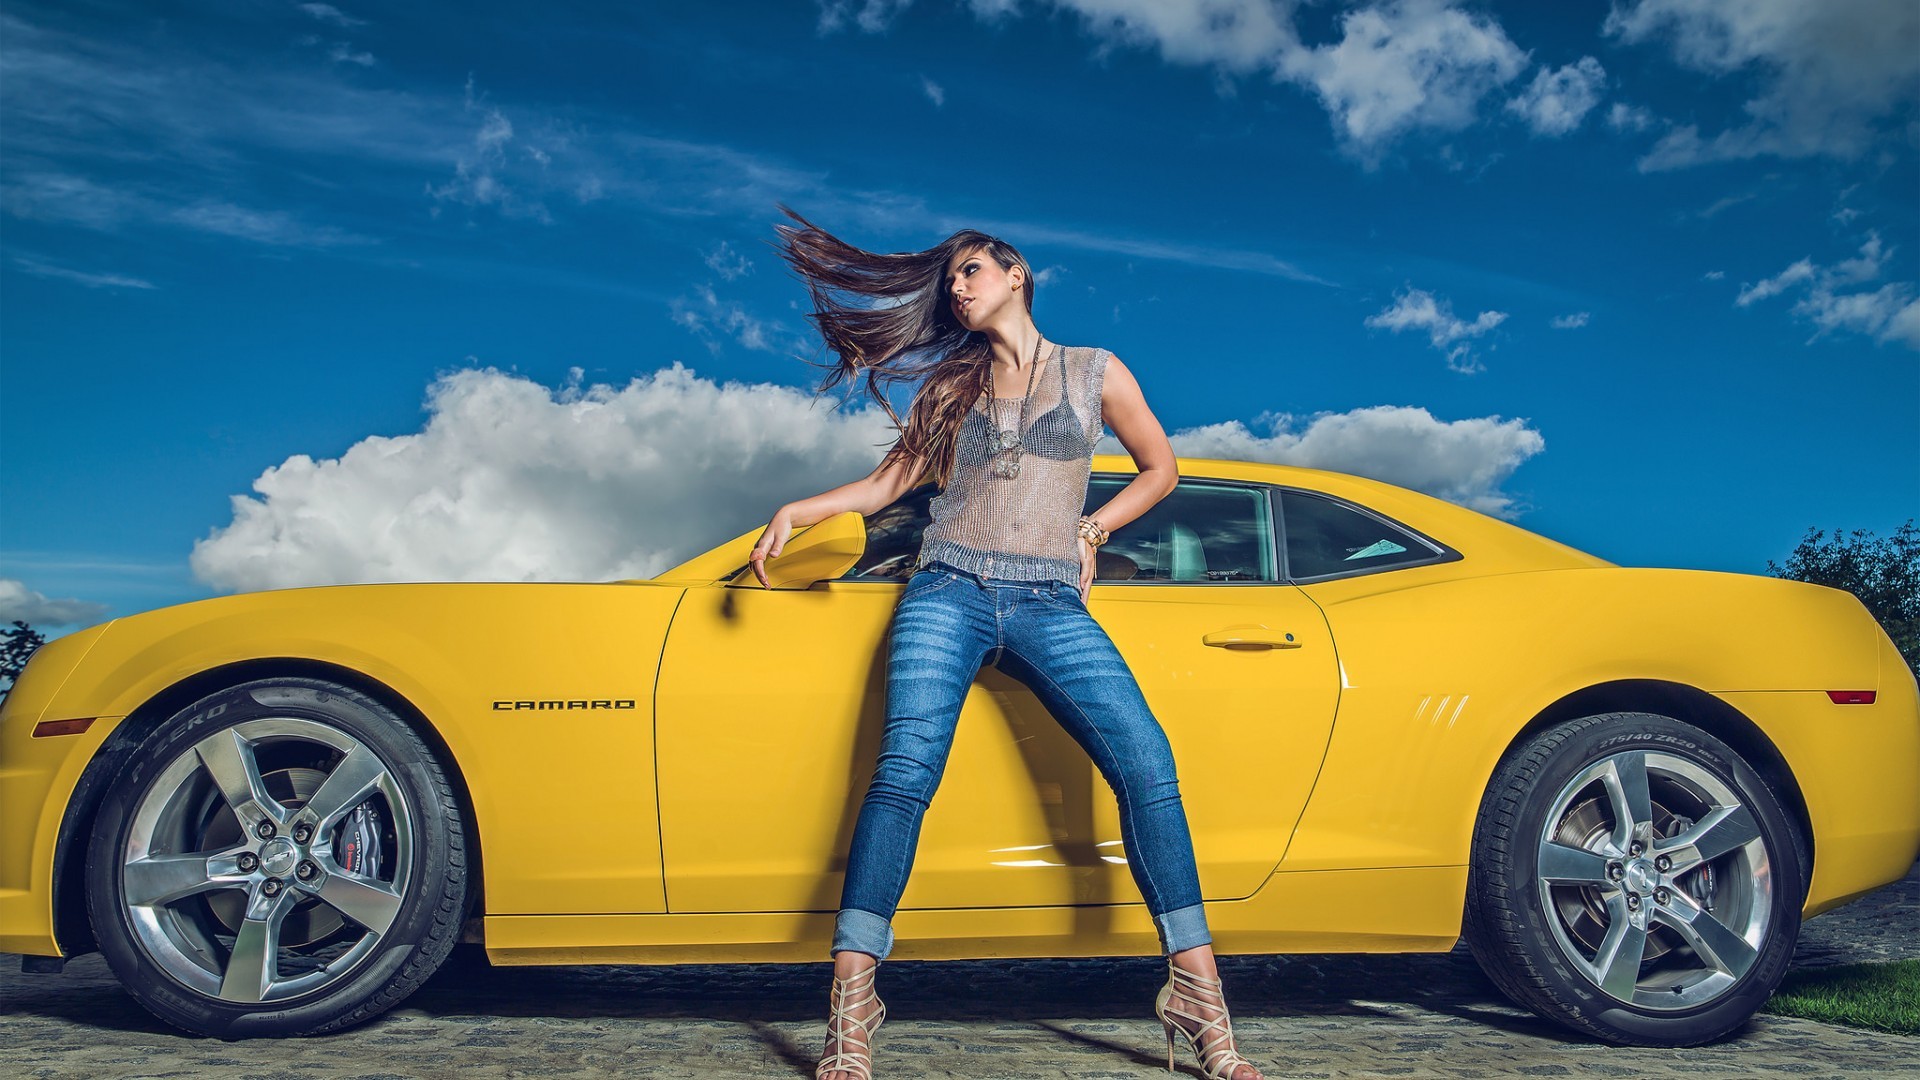 women with cars Wallpaper